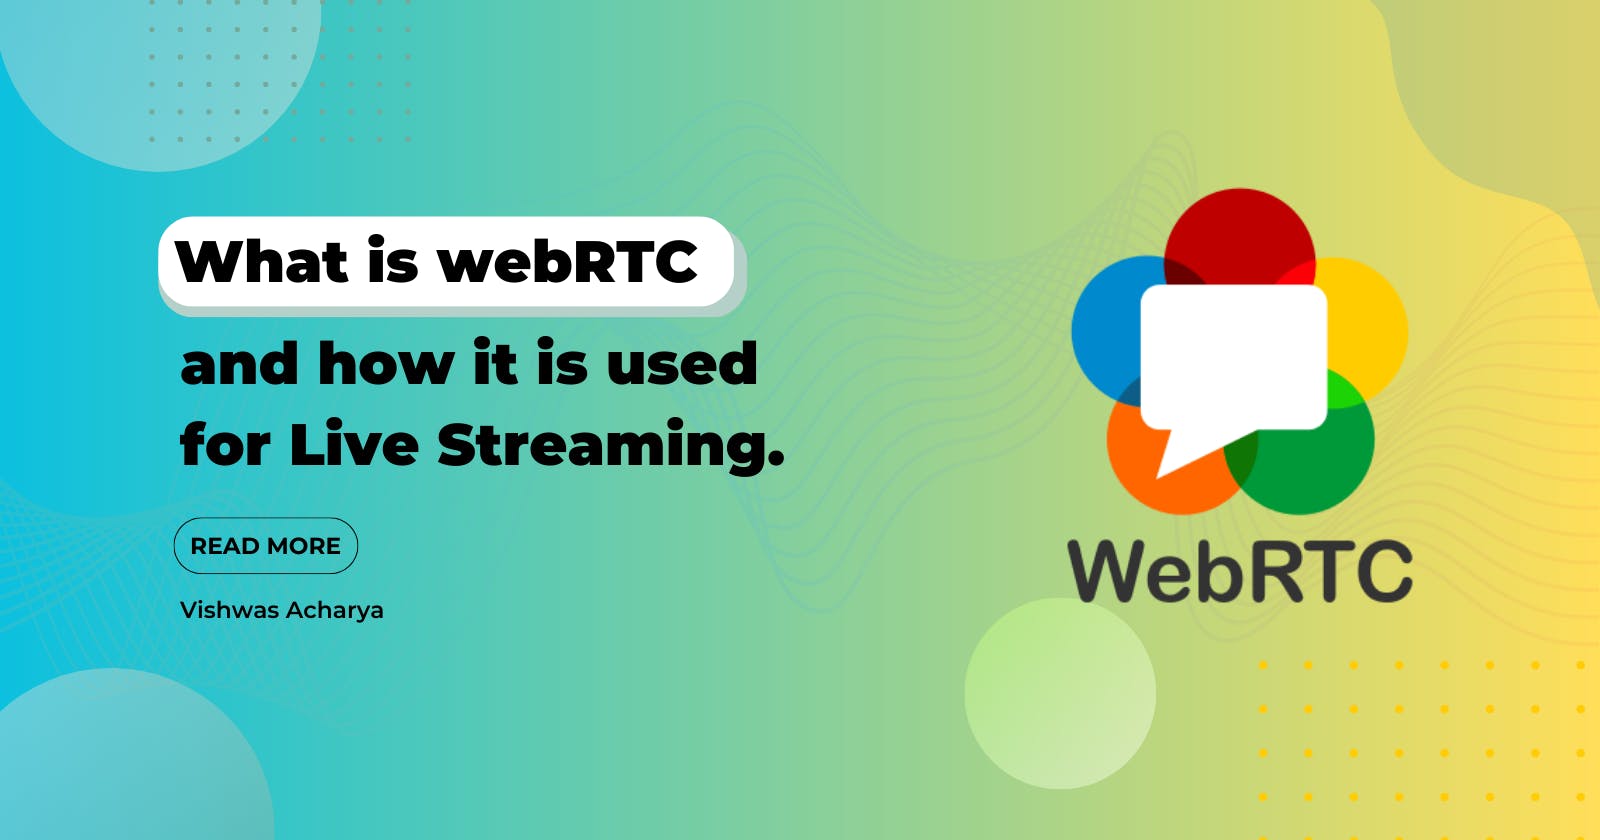 What is webRTC and how it is used for Live Streaming?